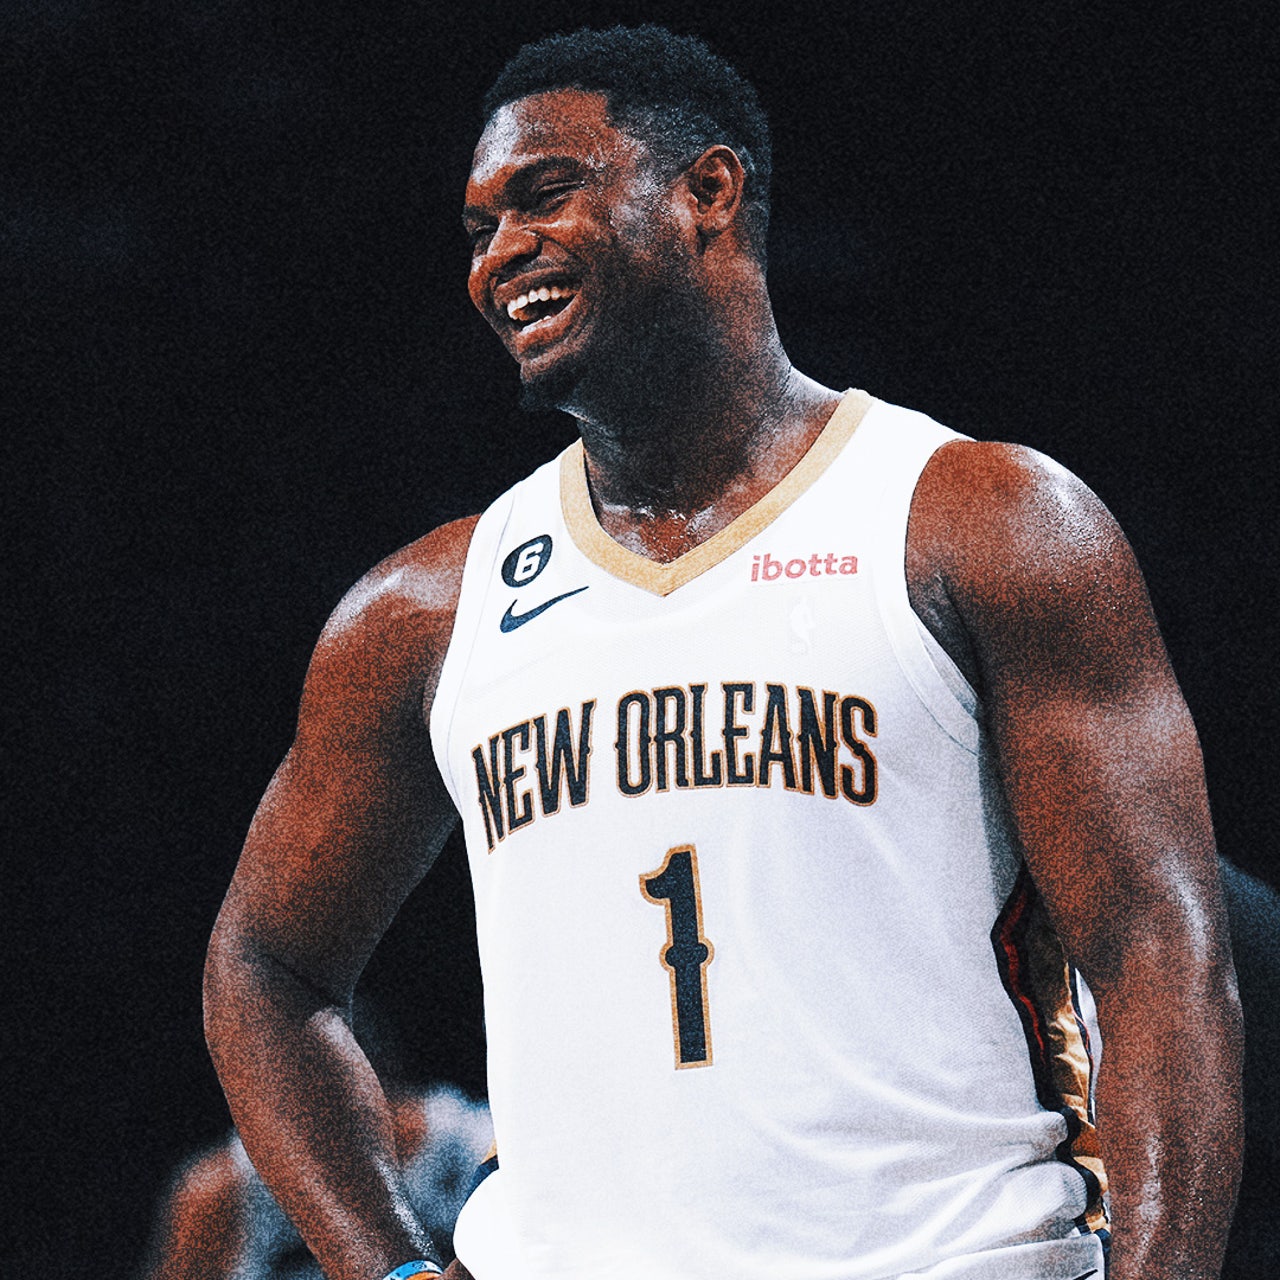 Zion Williamson: Three takeaways from Pelicans media day